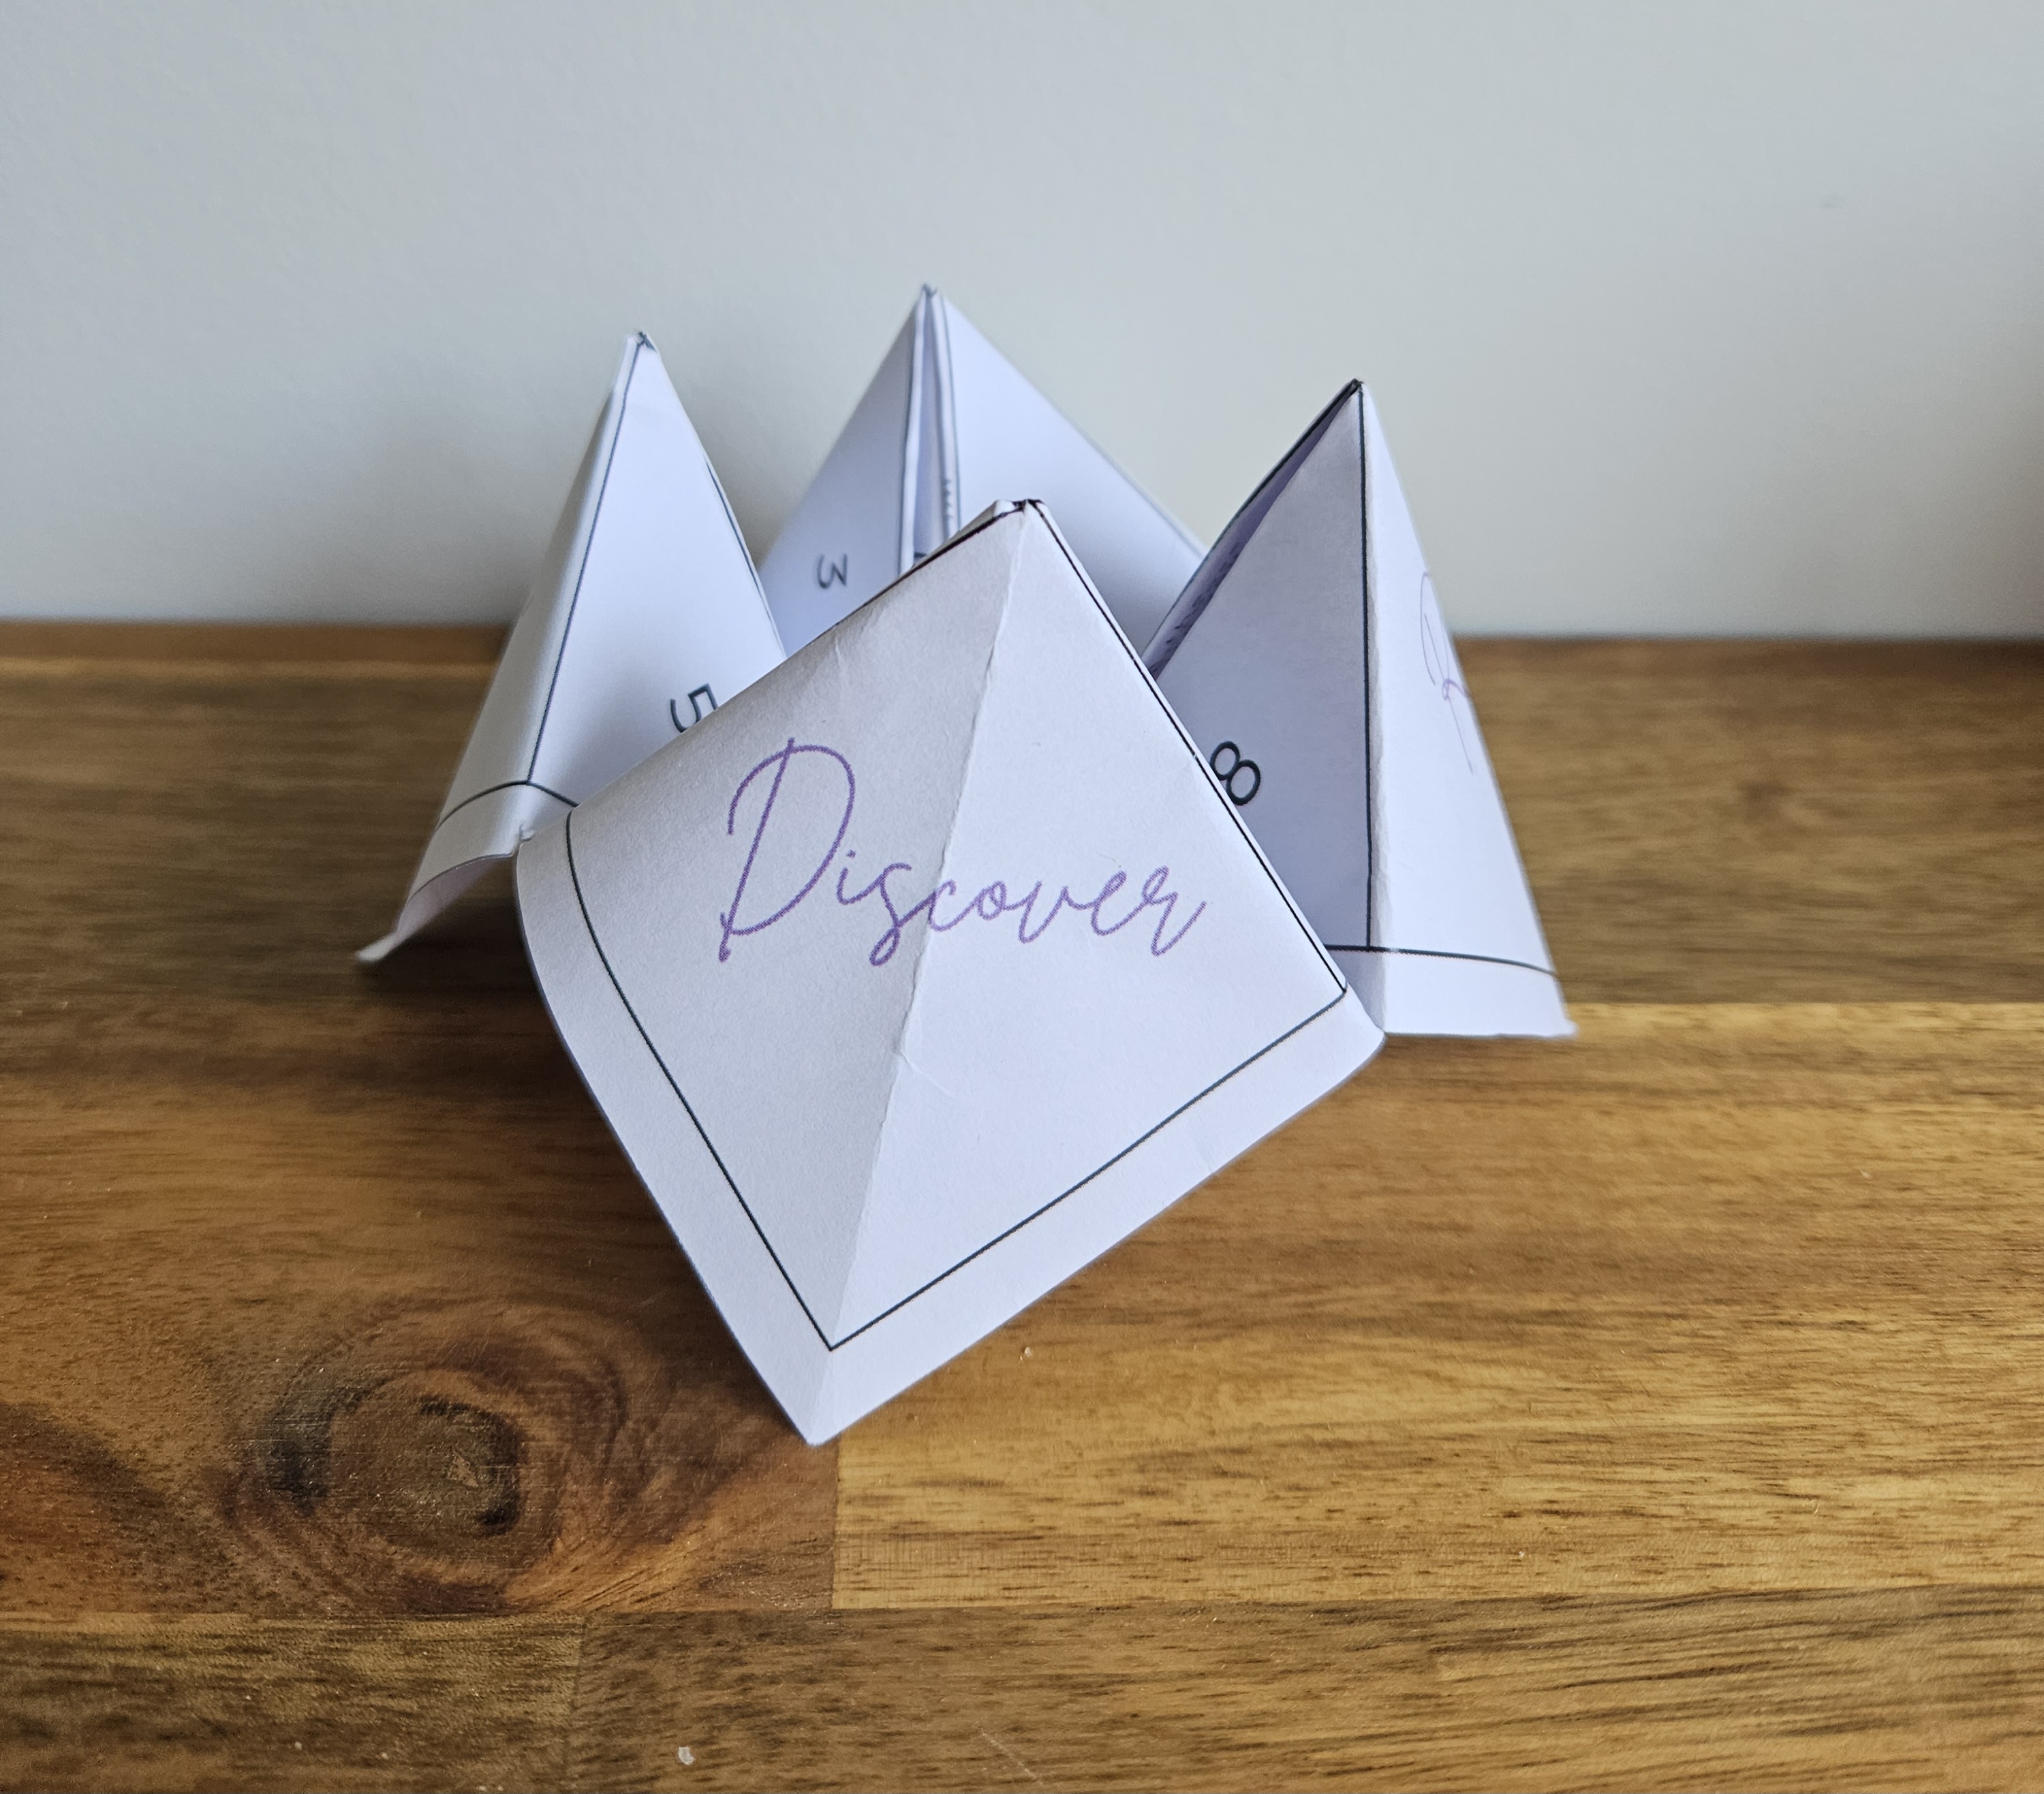 Paper folded into a chatterbox or fortune favour. On the outside of are words on the outside